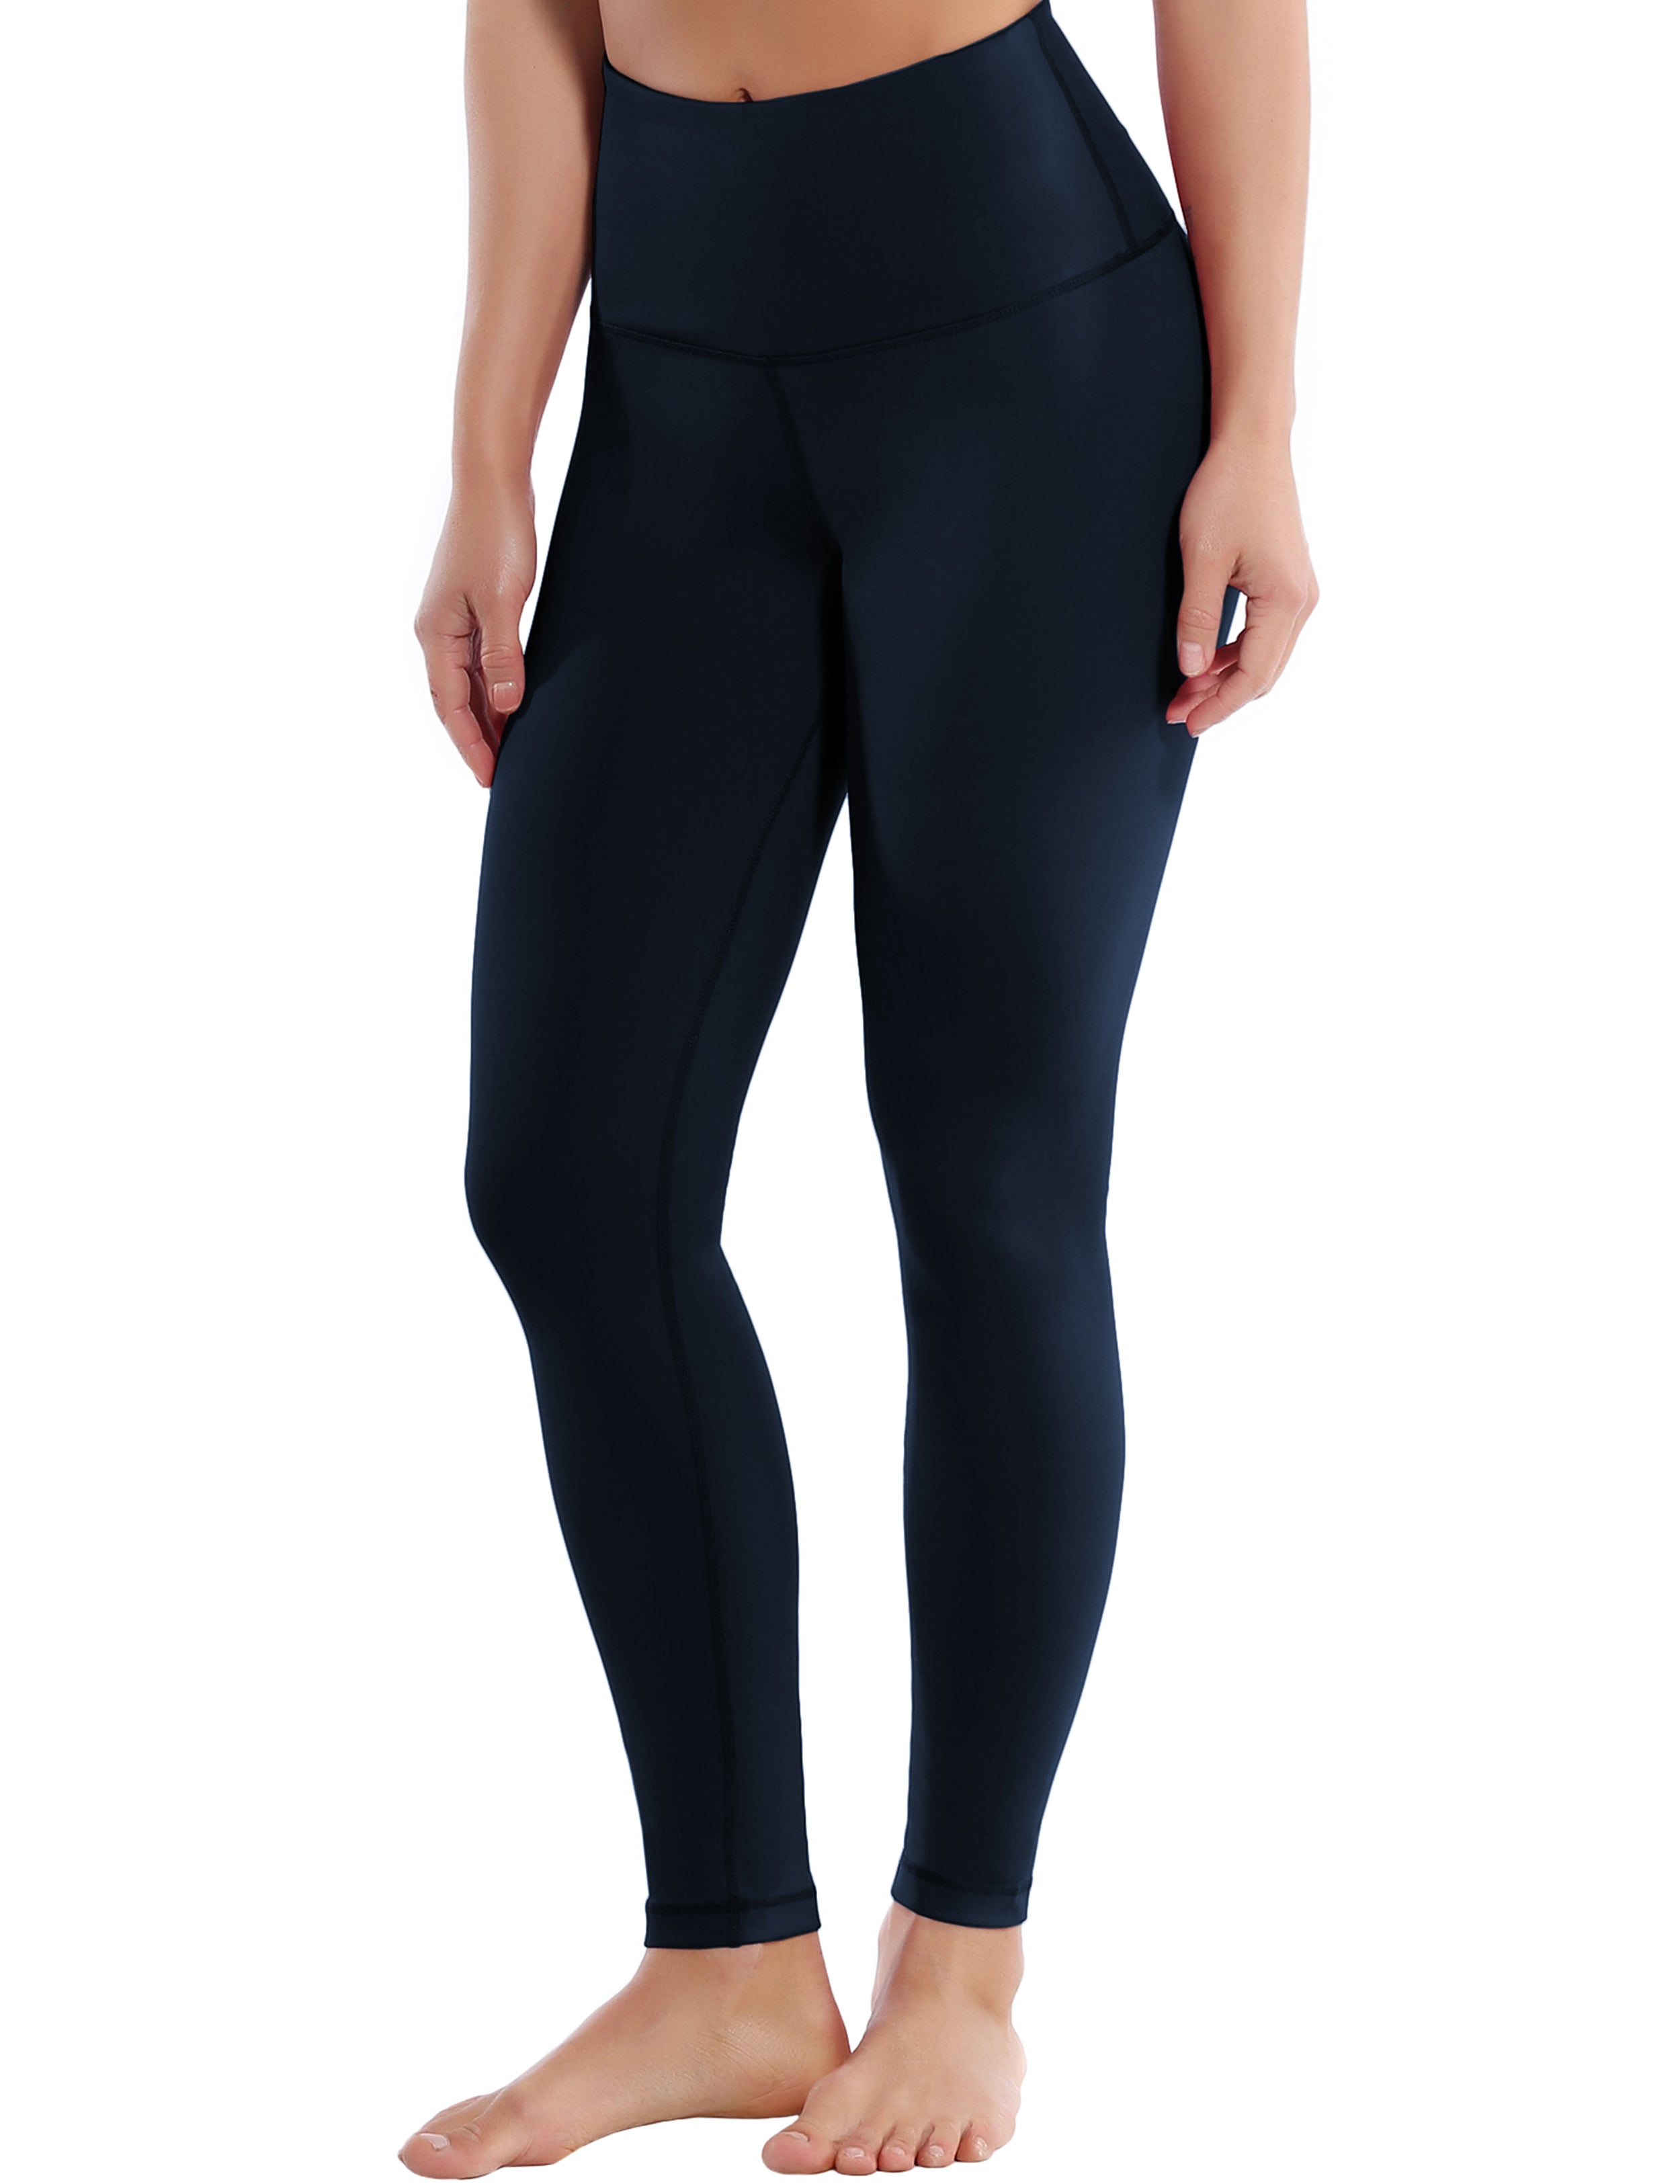 High Waist Biking Pants darknavy 75%Nylon/25%Spandex Fabric doesn't attract lint easily 4-way stretch No see-through Moisture-wicking Tummy control Inner pocket Four lengths